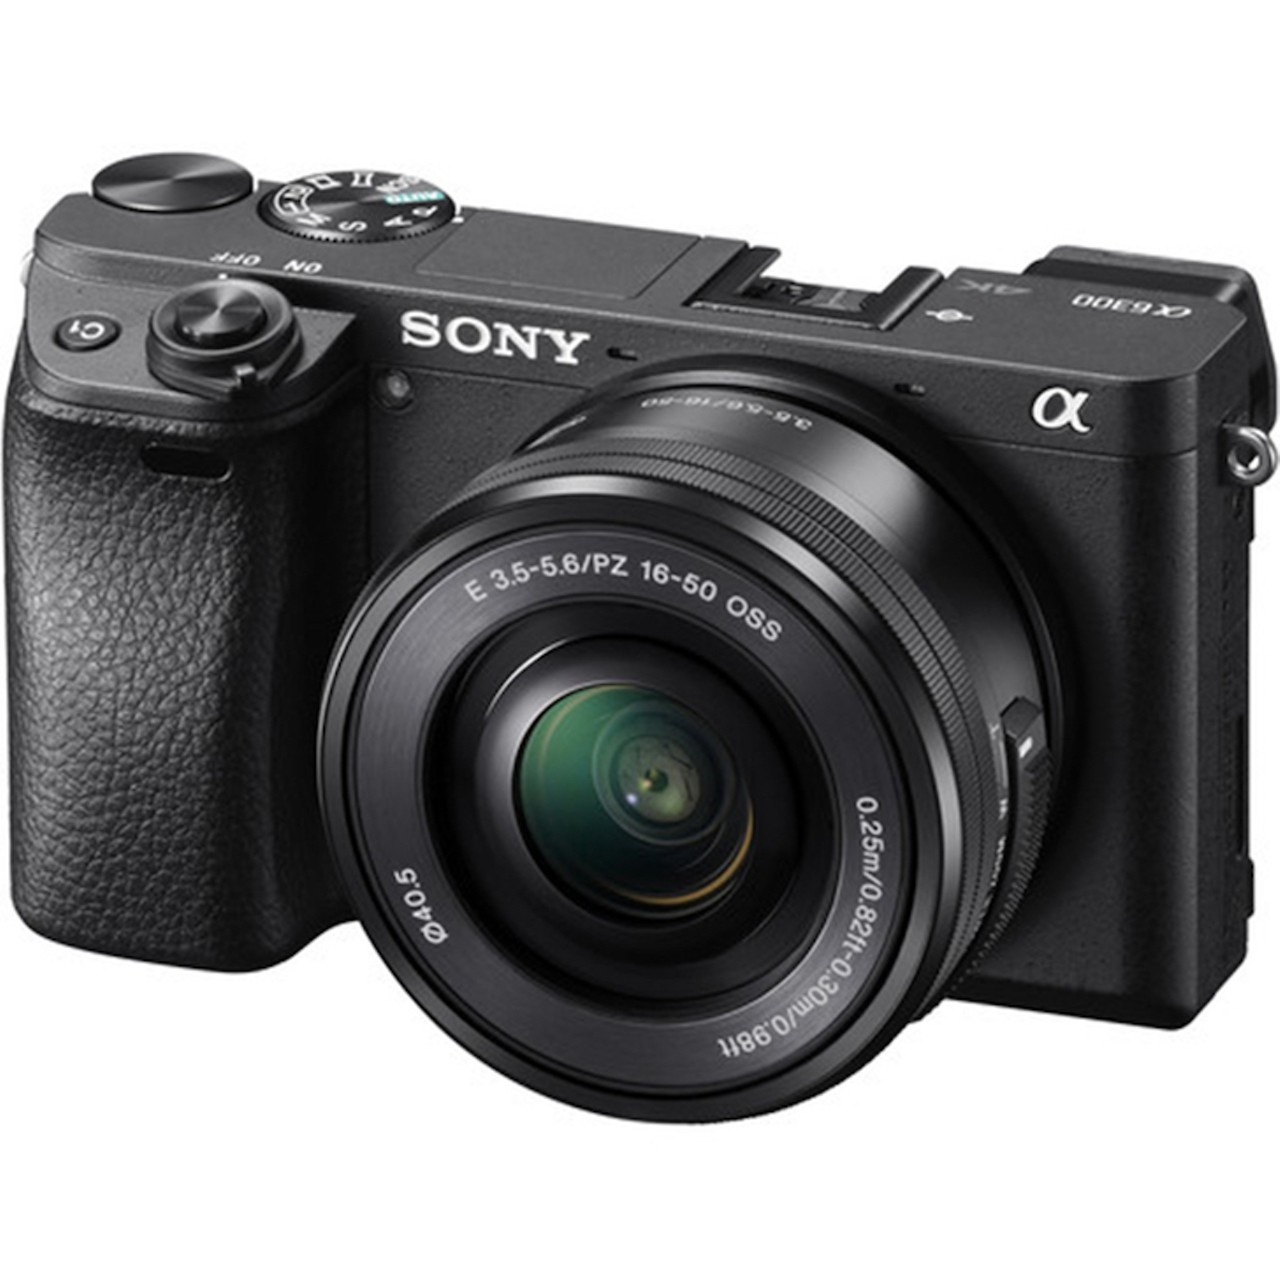 Sony Alpha a6300 Mirrorless Digital Camera, $900 and up
A beautiful camera for anything or anyone, really. It's a small body packed with a lot of great features &ndash; it's mirrorless, lightweight and has internal 4K recording. Interchangeable lenses and other accessories are available, if you're made of money.